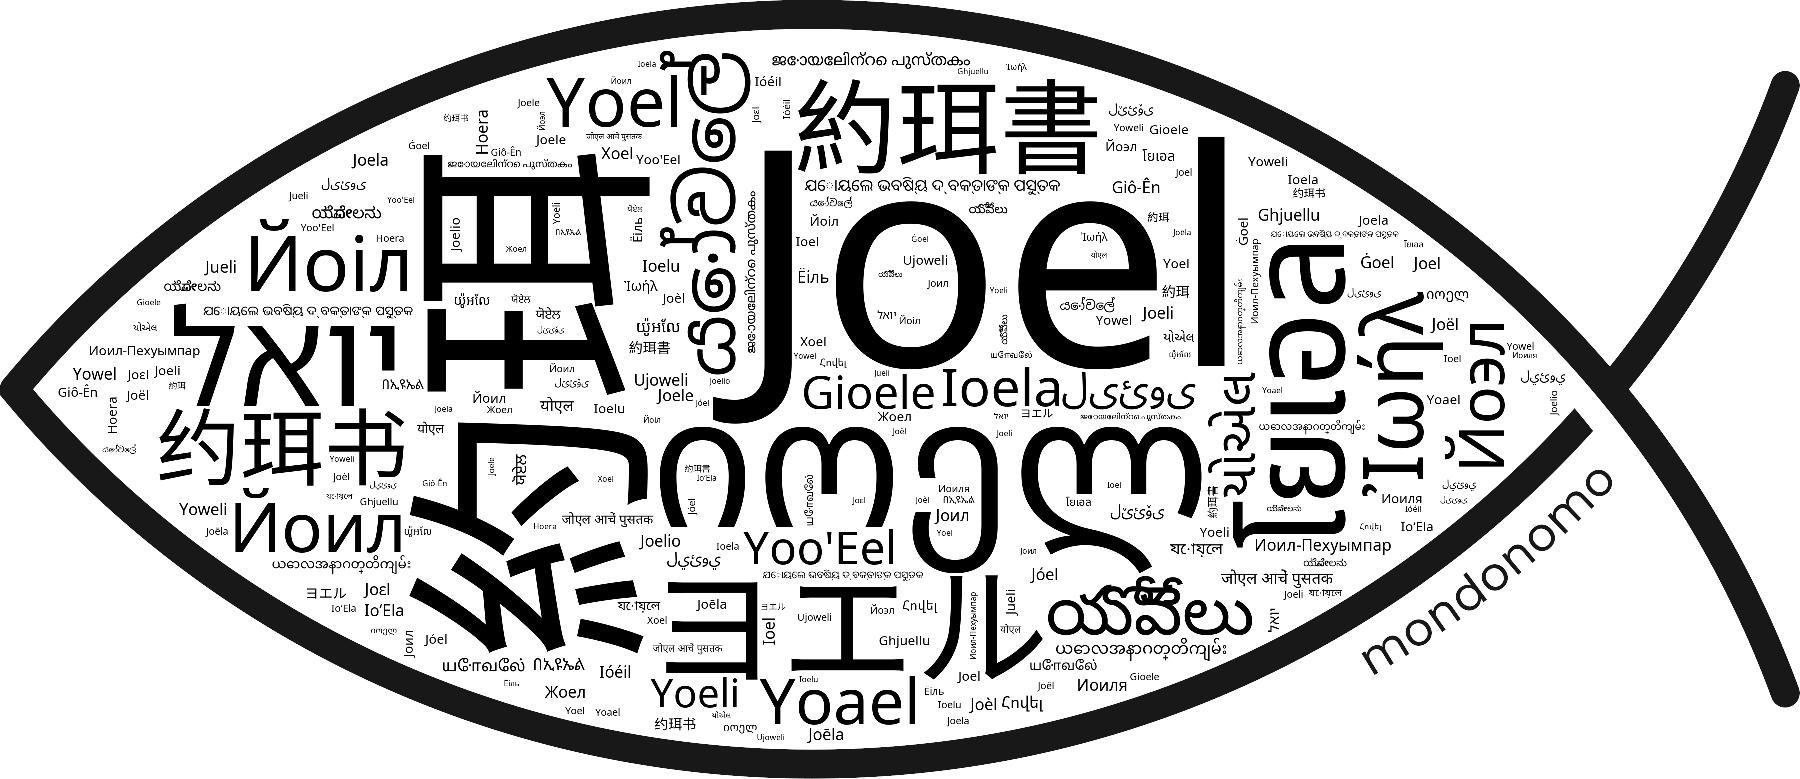 Name Joel in the world's Bibles